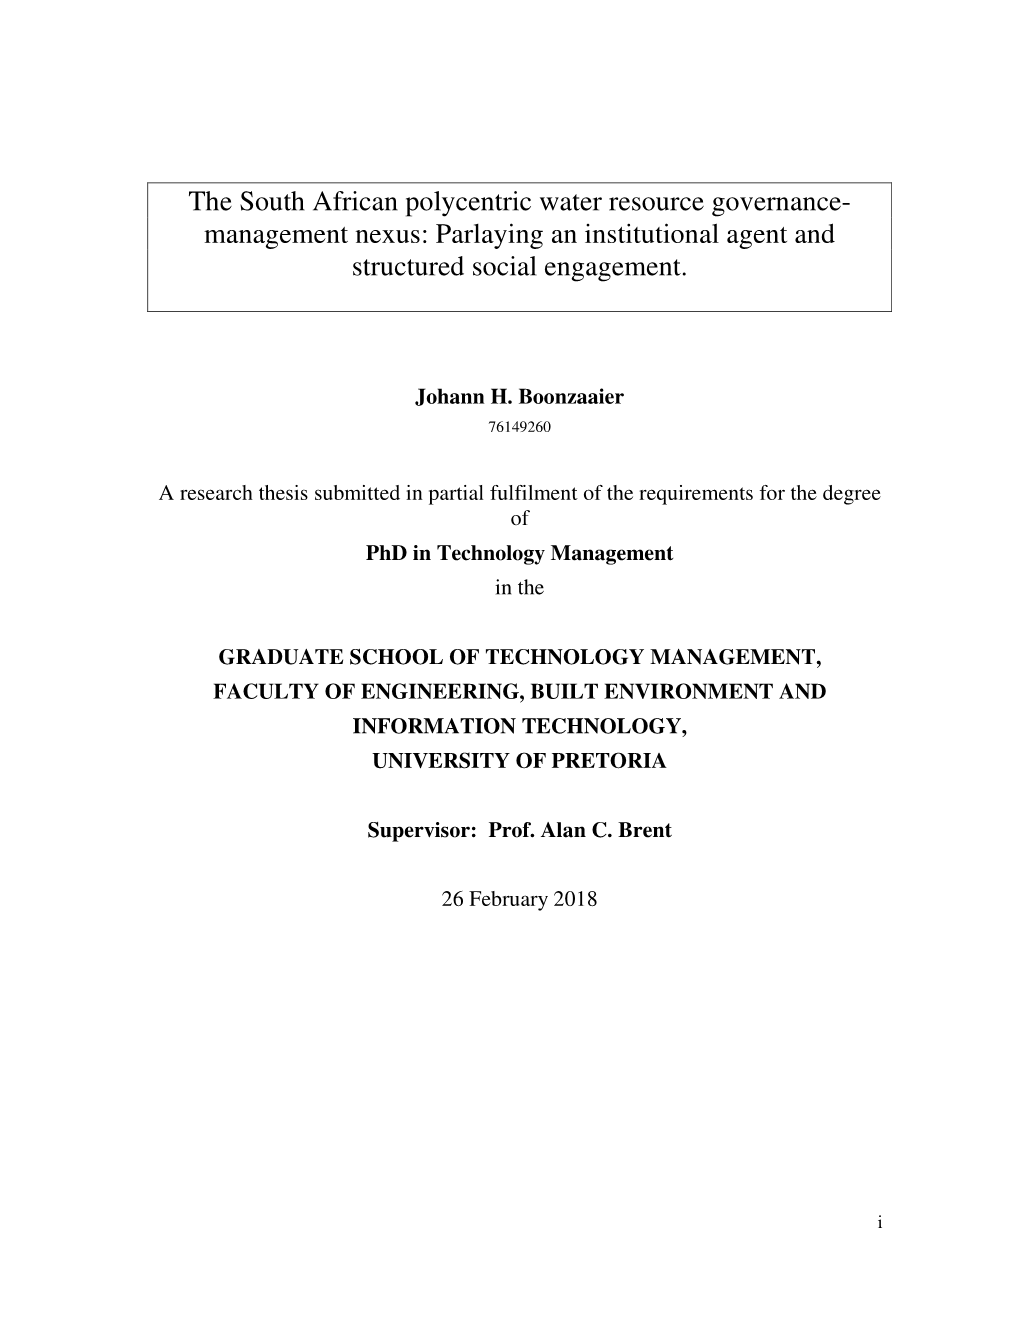 The South African Polycentric Water Resource Governance- Management Nexus: Parlaying an Institutional Agent and Structured Social Engagement